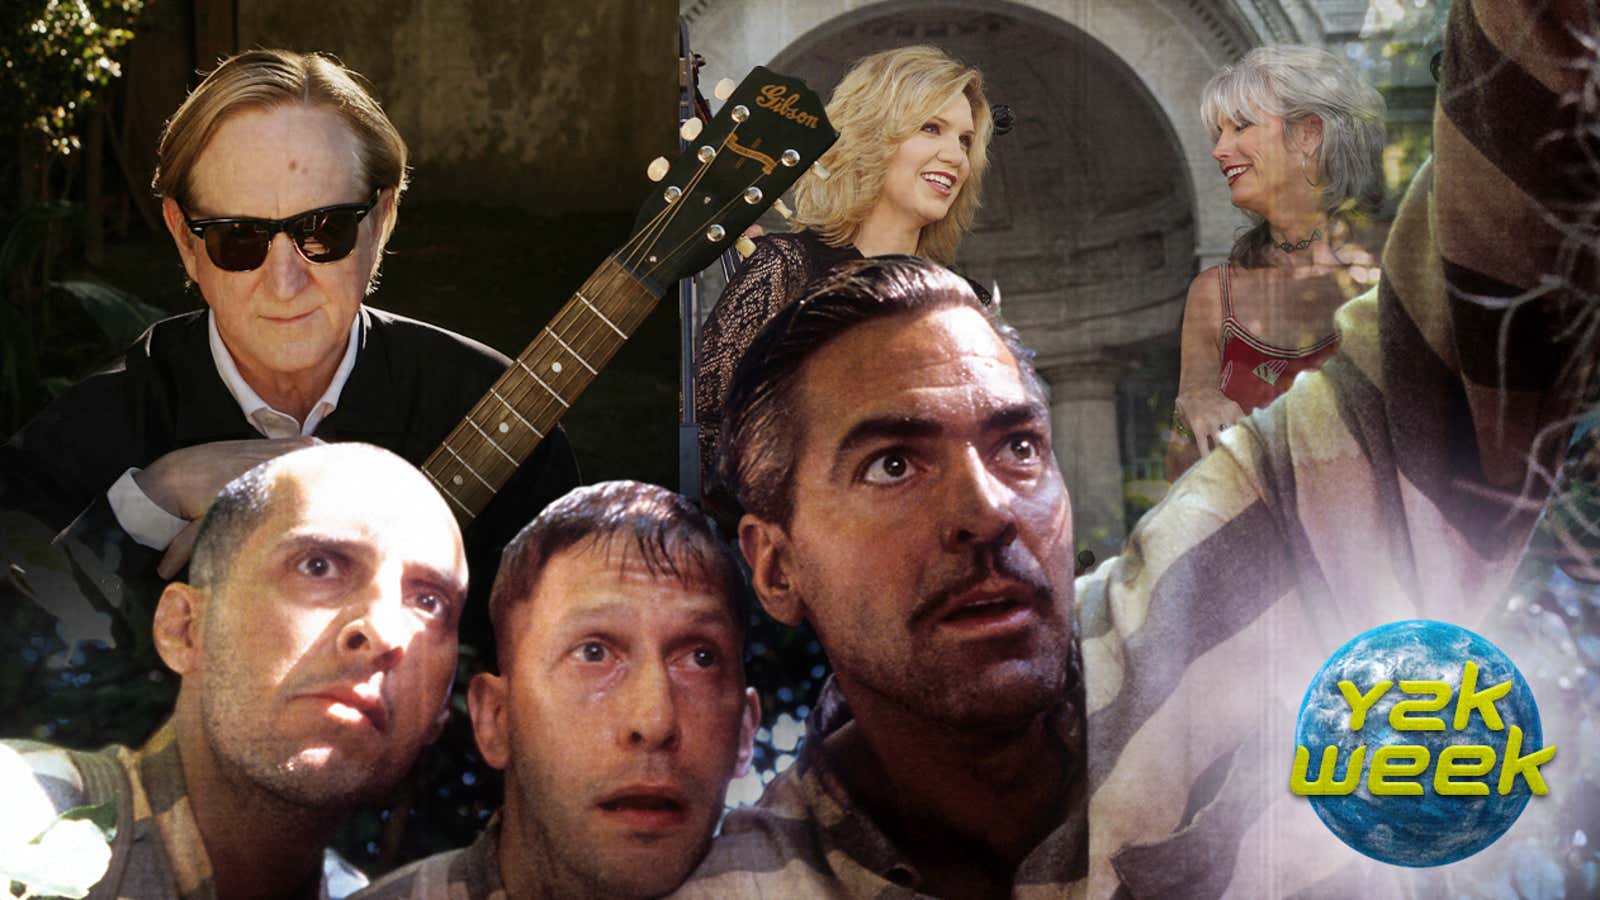 From left: T Bone Burnett (Liz O. Baylen/Los Angeles Times via Getty Images), John Turturro, Tim Blake Nelson and George Clooney in O Brother, Where Art Thou? (Universal/Getty Images), Alison Krauss and Emmylou Harris (Mychal Watts/WireImage/Getty Images) 